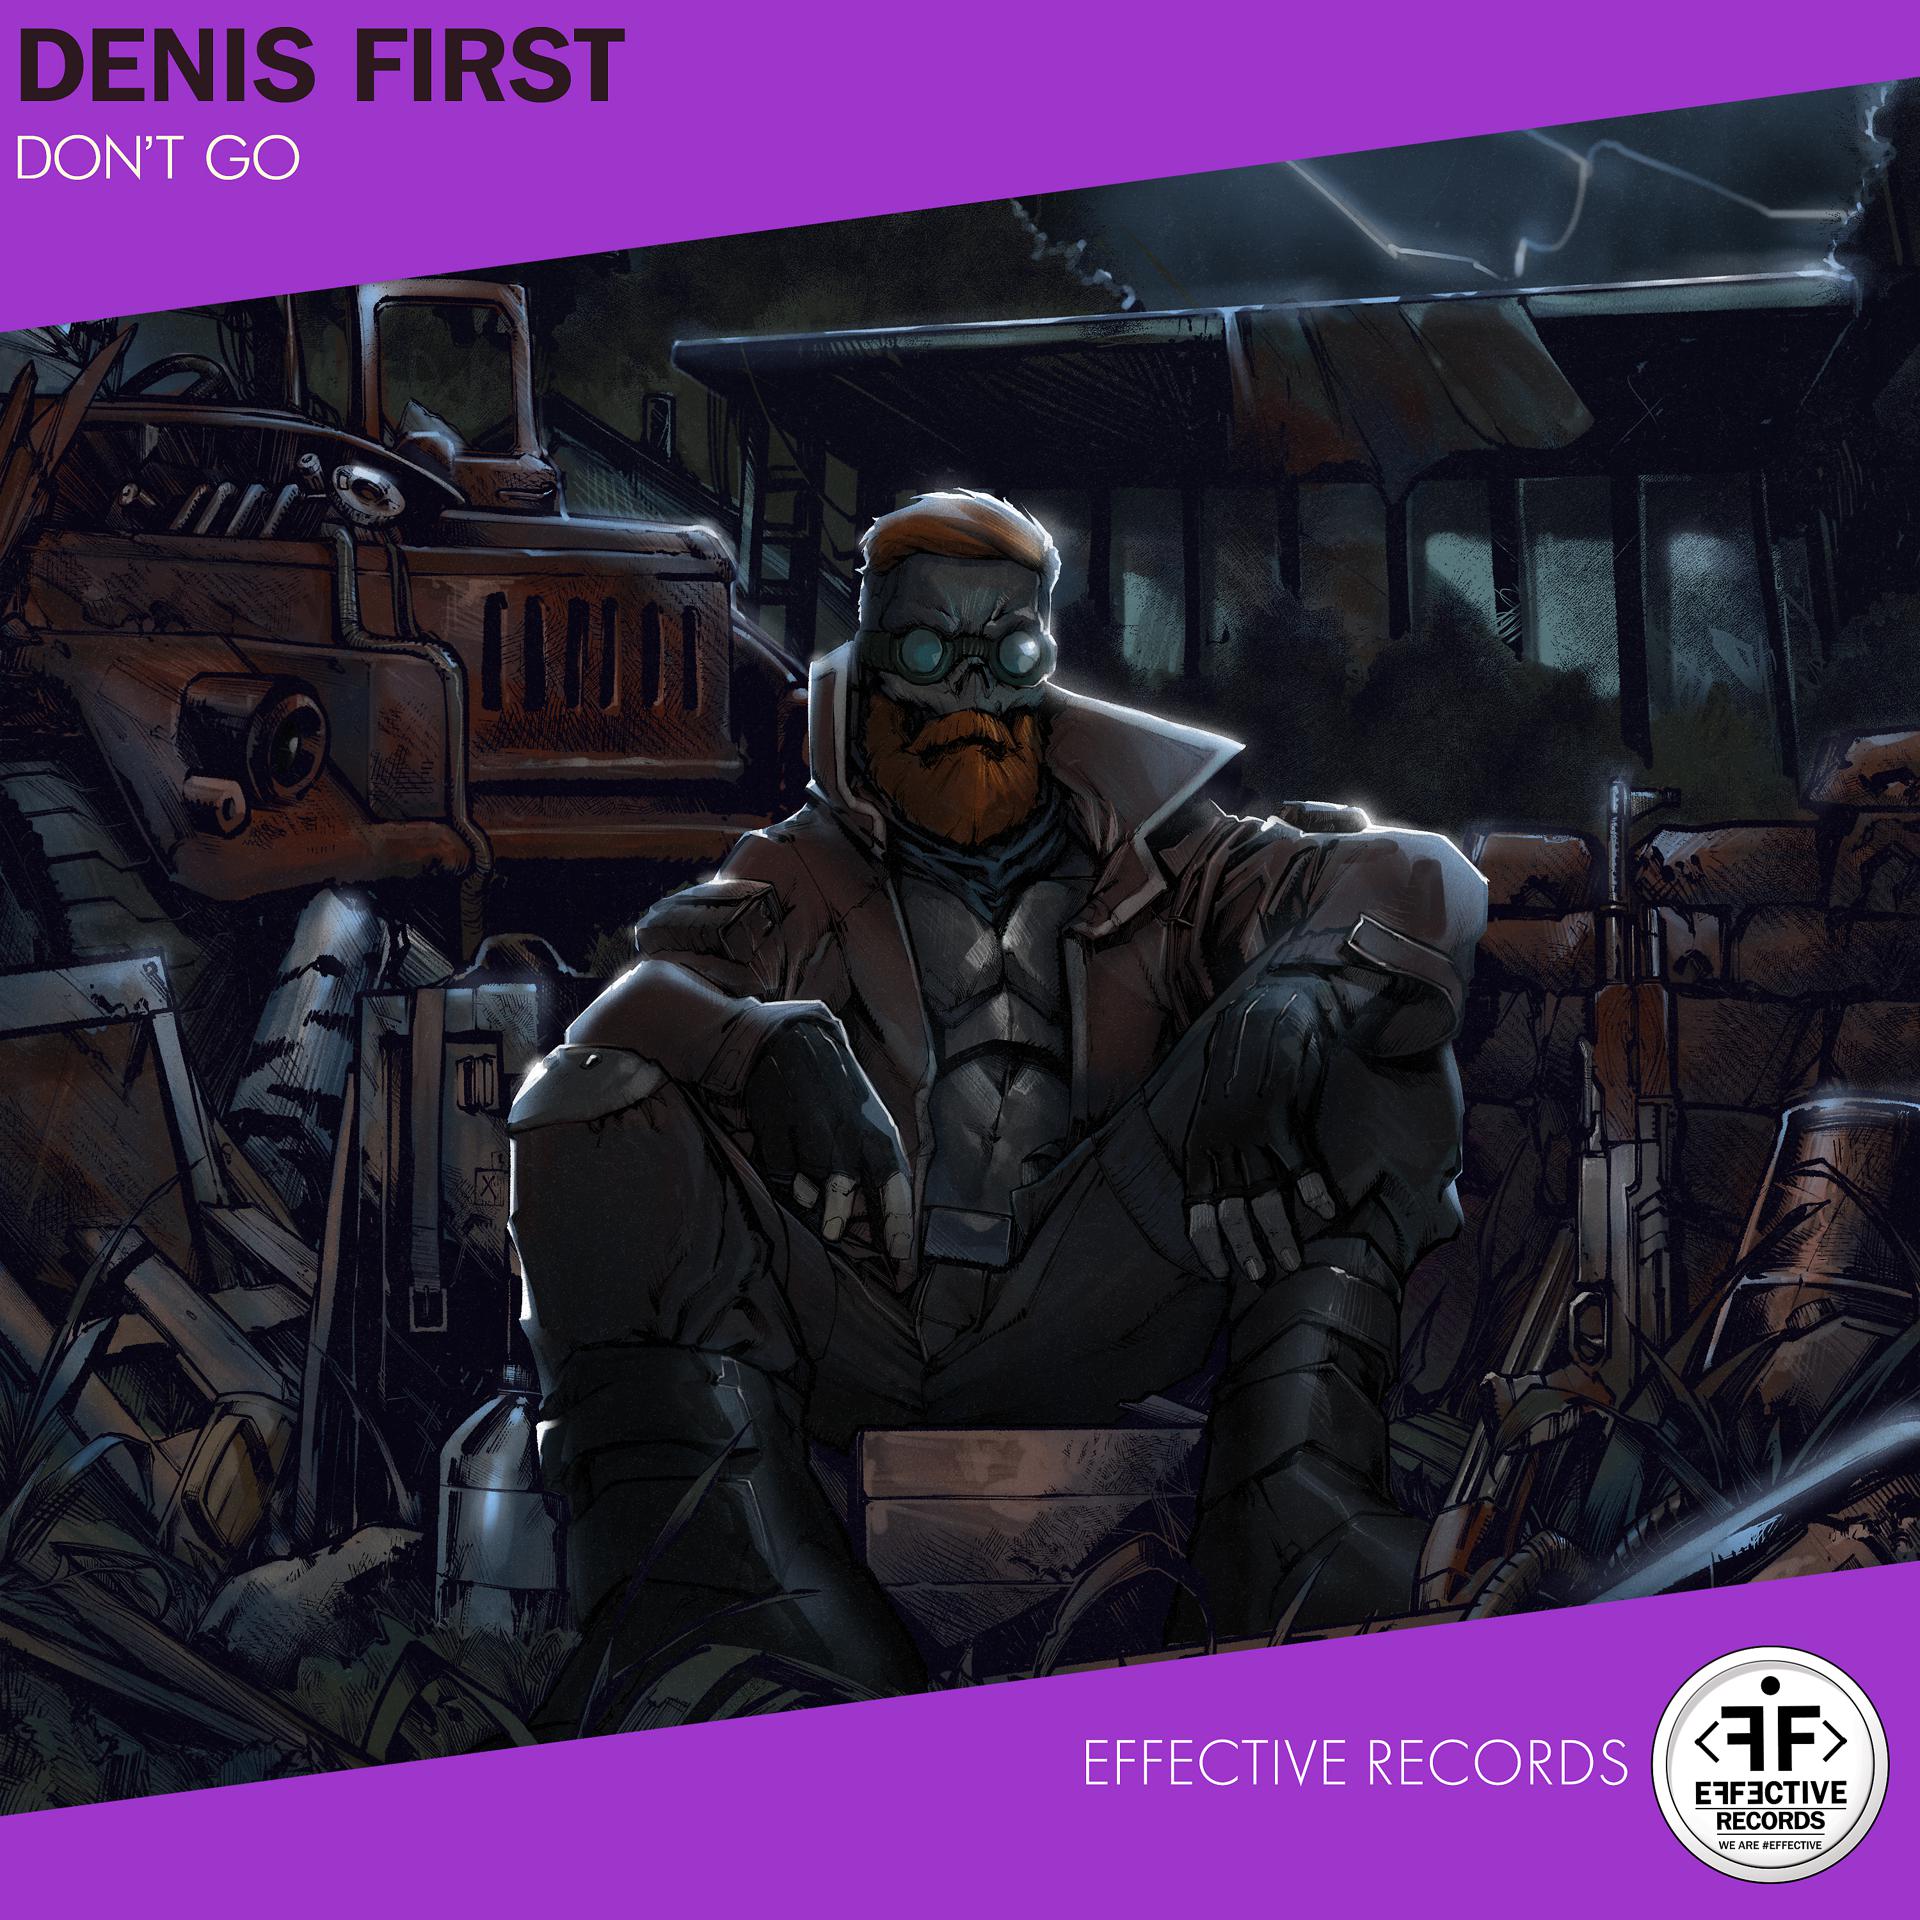 Denis first - don't go. Voodoo Denis first. Denis first - my Desire. Dont first